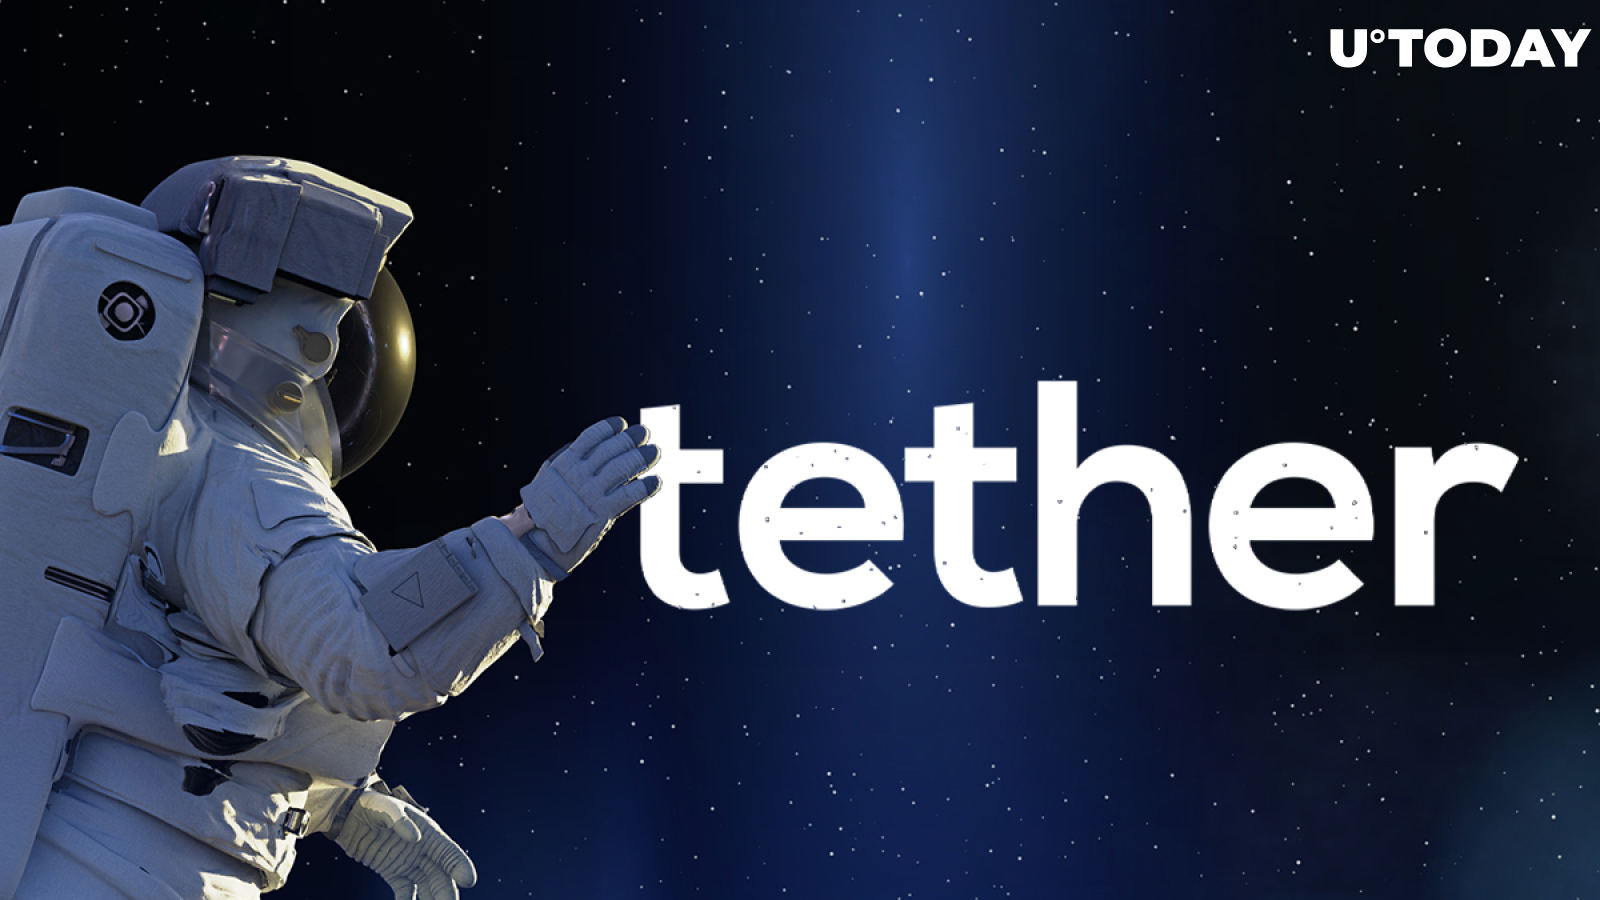 Tether's Circulating Supply Surpasses $10 Bln Amid Mushrooming Demand for Stablecoins